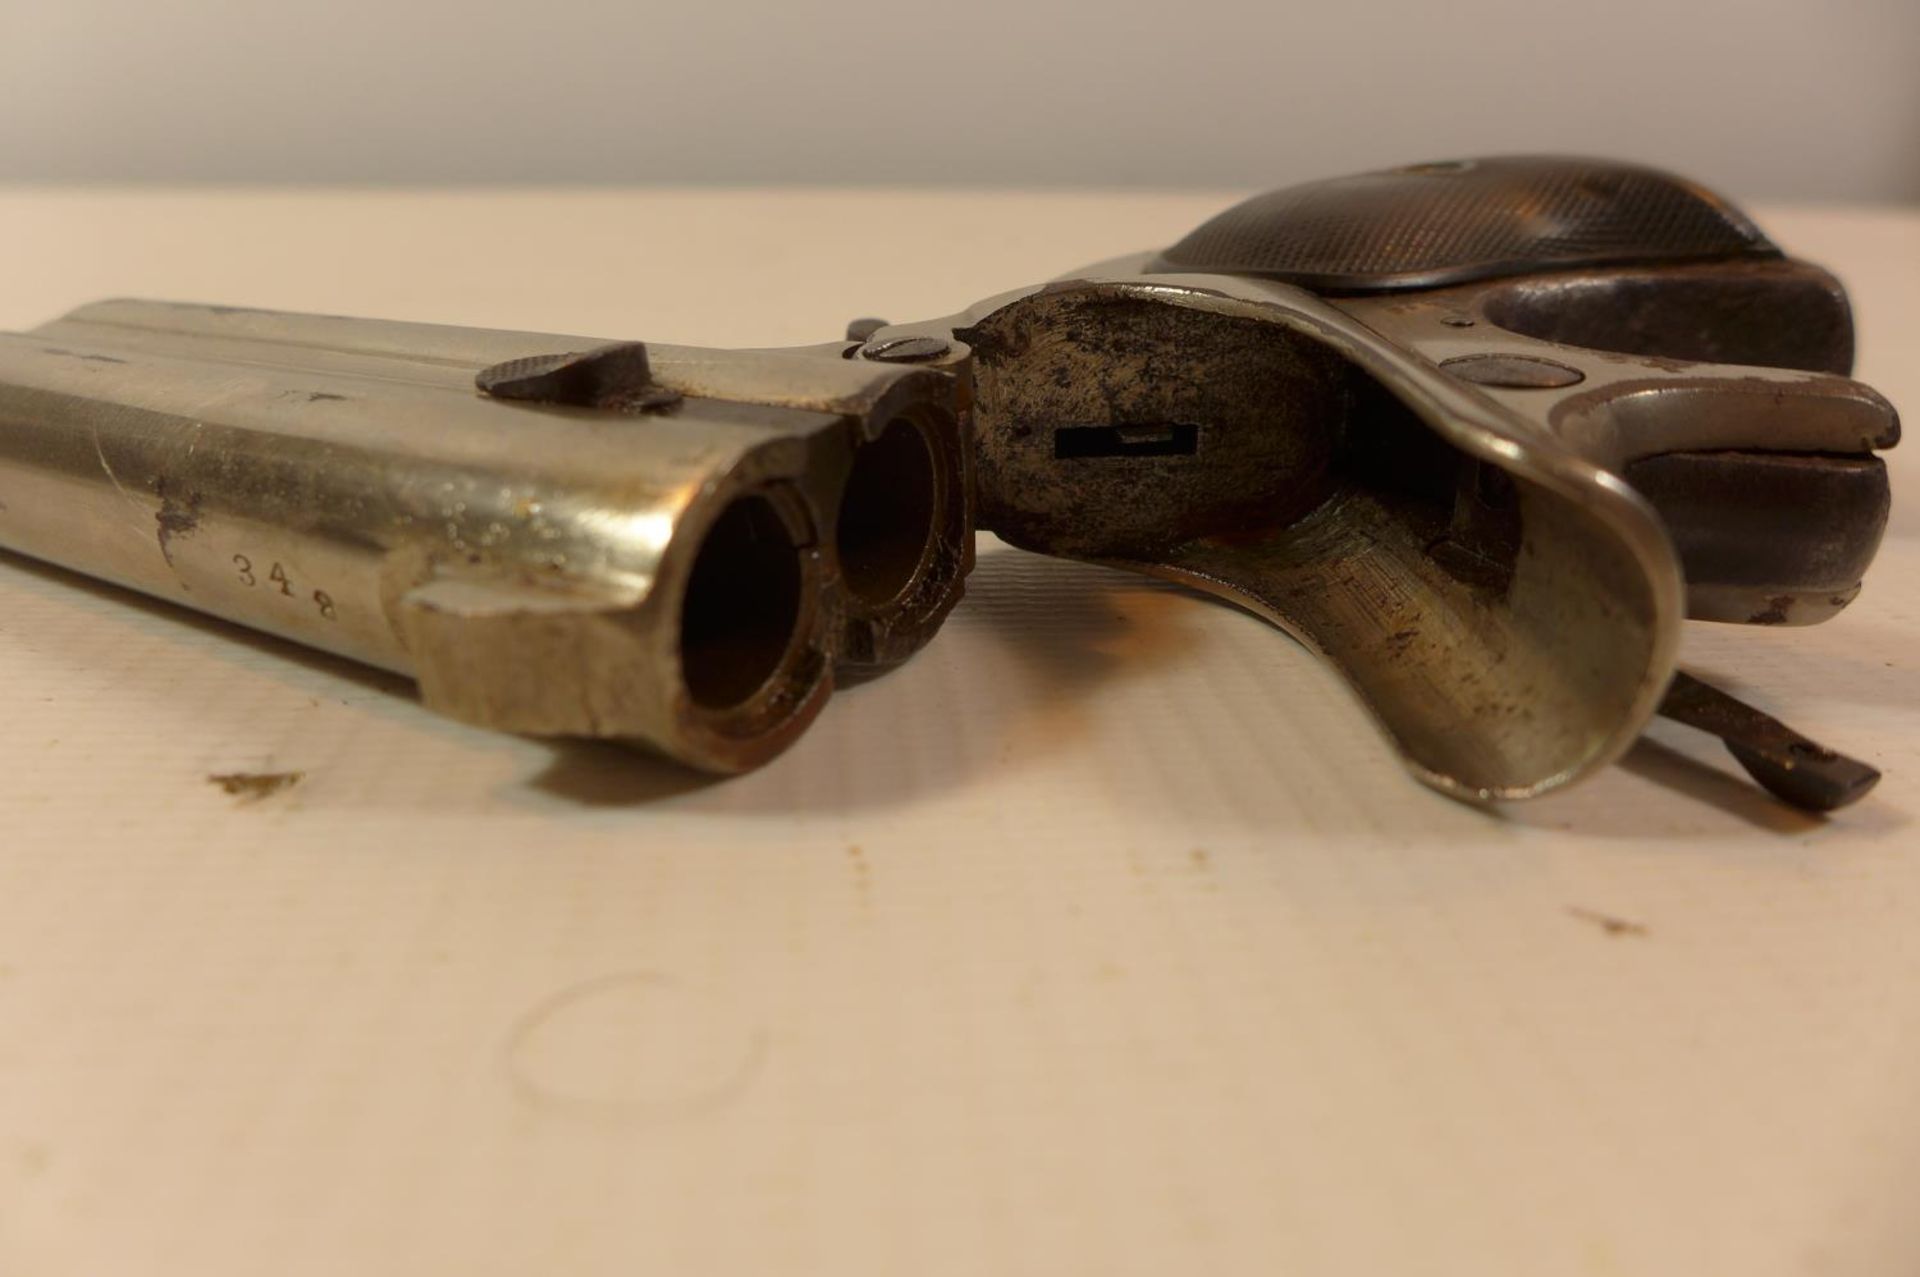 A REMINGTON 41 CALIBRE RIMFIRE OVER AND UNDER DERRINGER, WITH A 7.5CM BARREL MARKED REMINGTON ARMS - Image 9 of 9